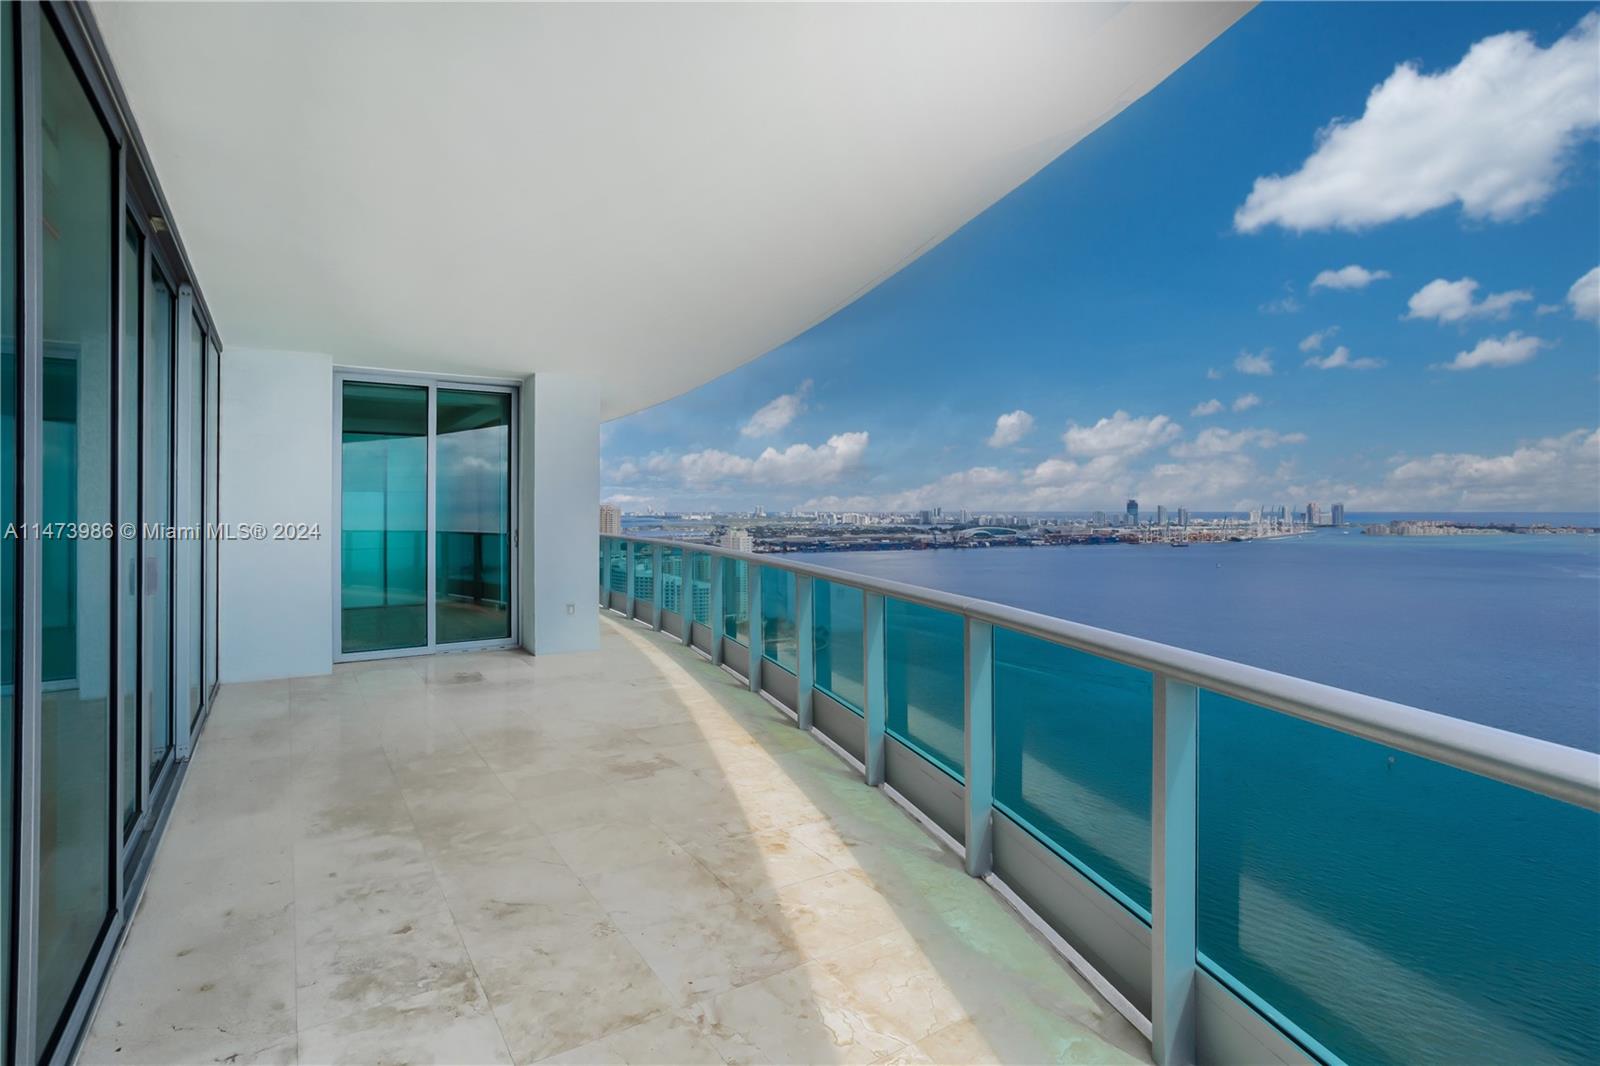 The wait is over for the most sought-after, high floor 11-line corner unit occupying the rarely available south end at Jade Brickell. Perched on the 40th floor, this flow through unit provides unobstructed, forever panoramic views of the mesmerizing turquoise waters of Biscayne Bay & Atlantic Ocean. Southern exposure provides natural sunlight in every room. This exceptional property boasts over 3,400+ interior SF, offering a spacious & luxurious living experience. With 4 bedrooms plus maid's quarter, 4.5 bathrooms, & 3 separate terraces, it's the epitome of grandeur & comfort. Jade Brickell is the quintessential 5-star condominium. Enjoy a state-of-the-art fitness center, spa, two pools, & much more. The perfect waterfront location & walking distance to everything Brickell has to offer.